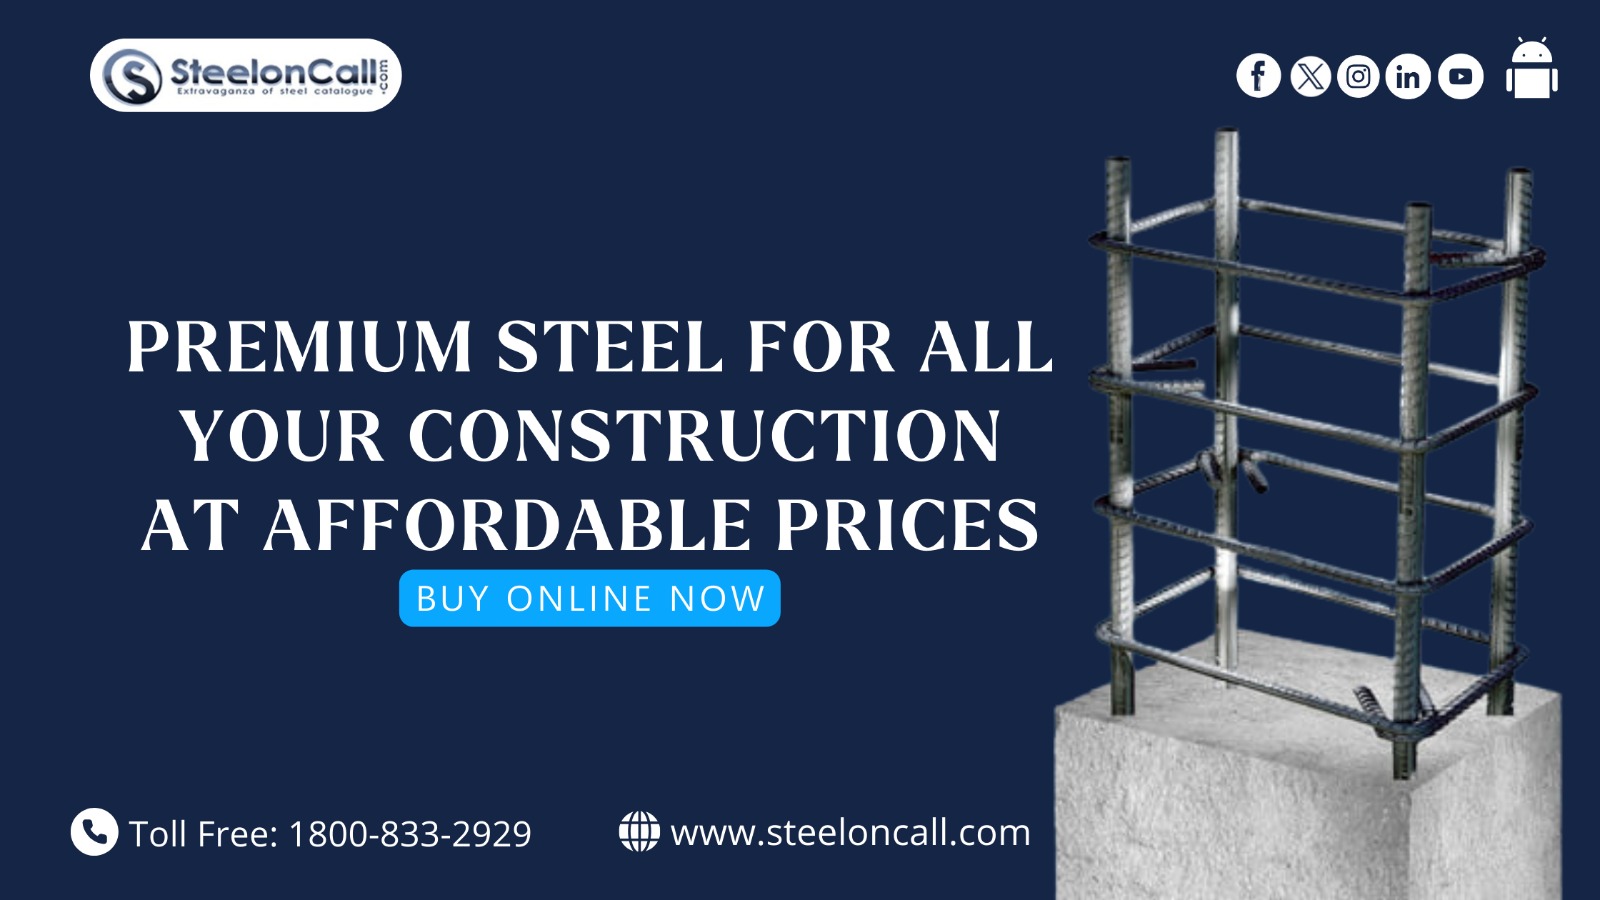 Premium Steel at Affordable Prices - Steeloncall 